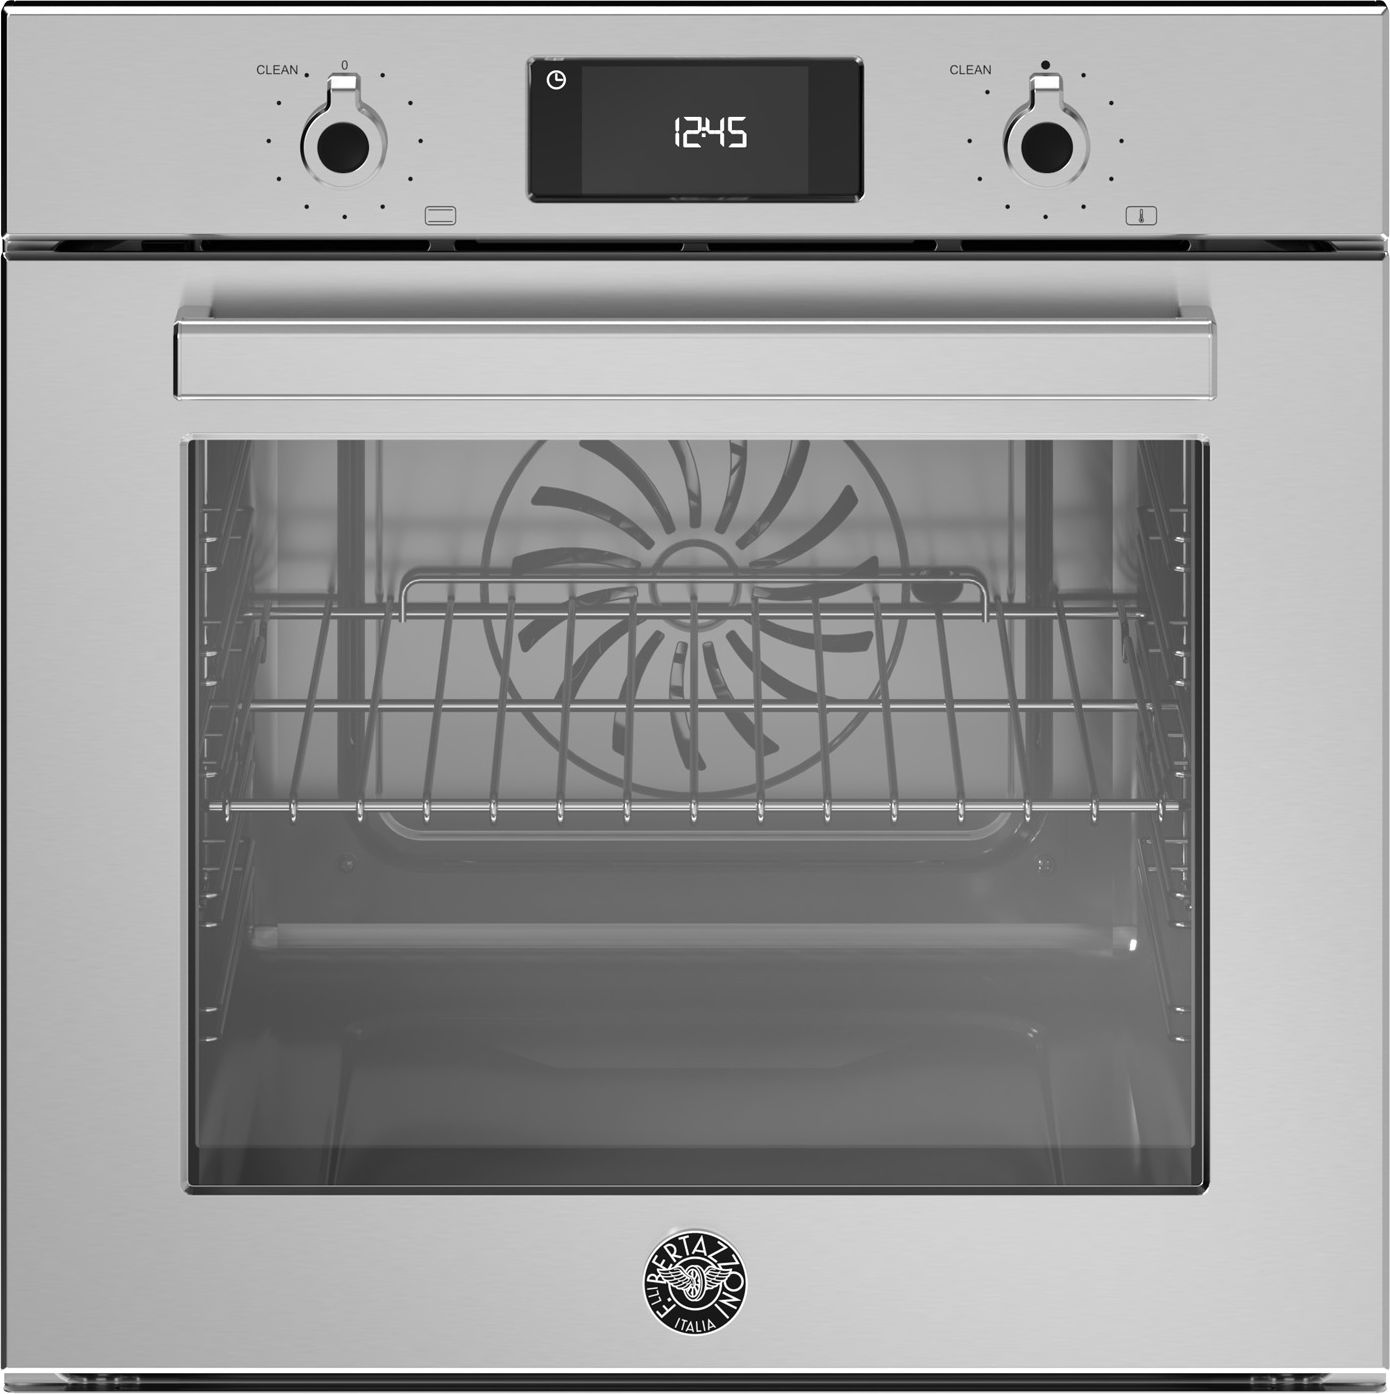 Bertazzoni Professional Series F6011PROPLX Built In Electric Single Oven with Pyrolytic Cleaning - Stainless Steel - A++ Rated, Stainless Steel